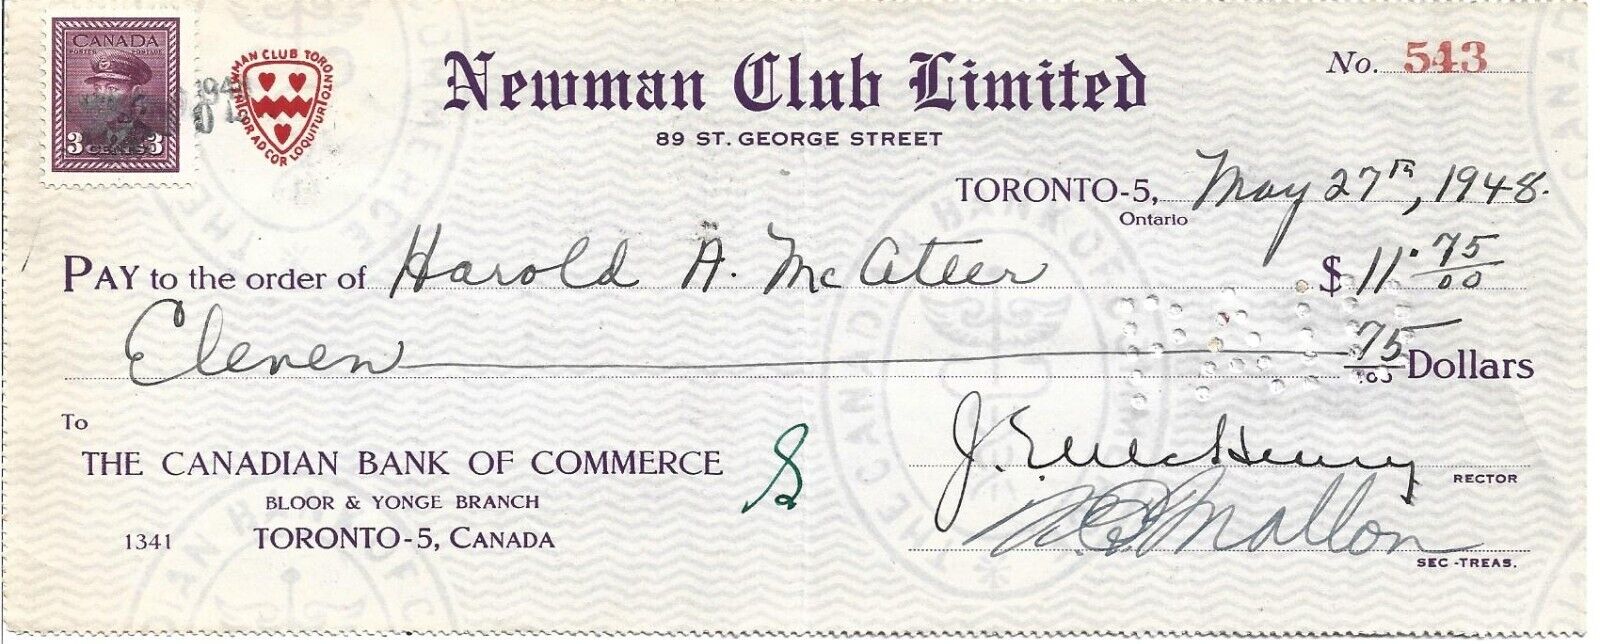 1940s Canada Bank Check Newman Club Limited Toronto-5 Ontario 3c Fee Paid Stamp